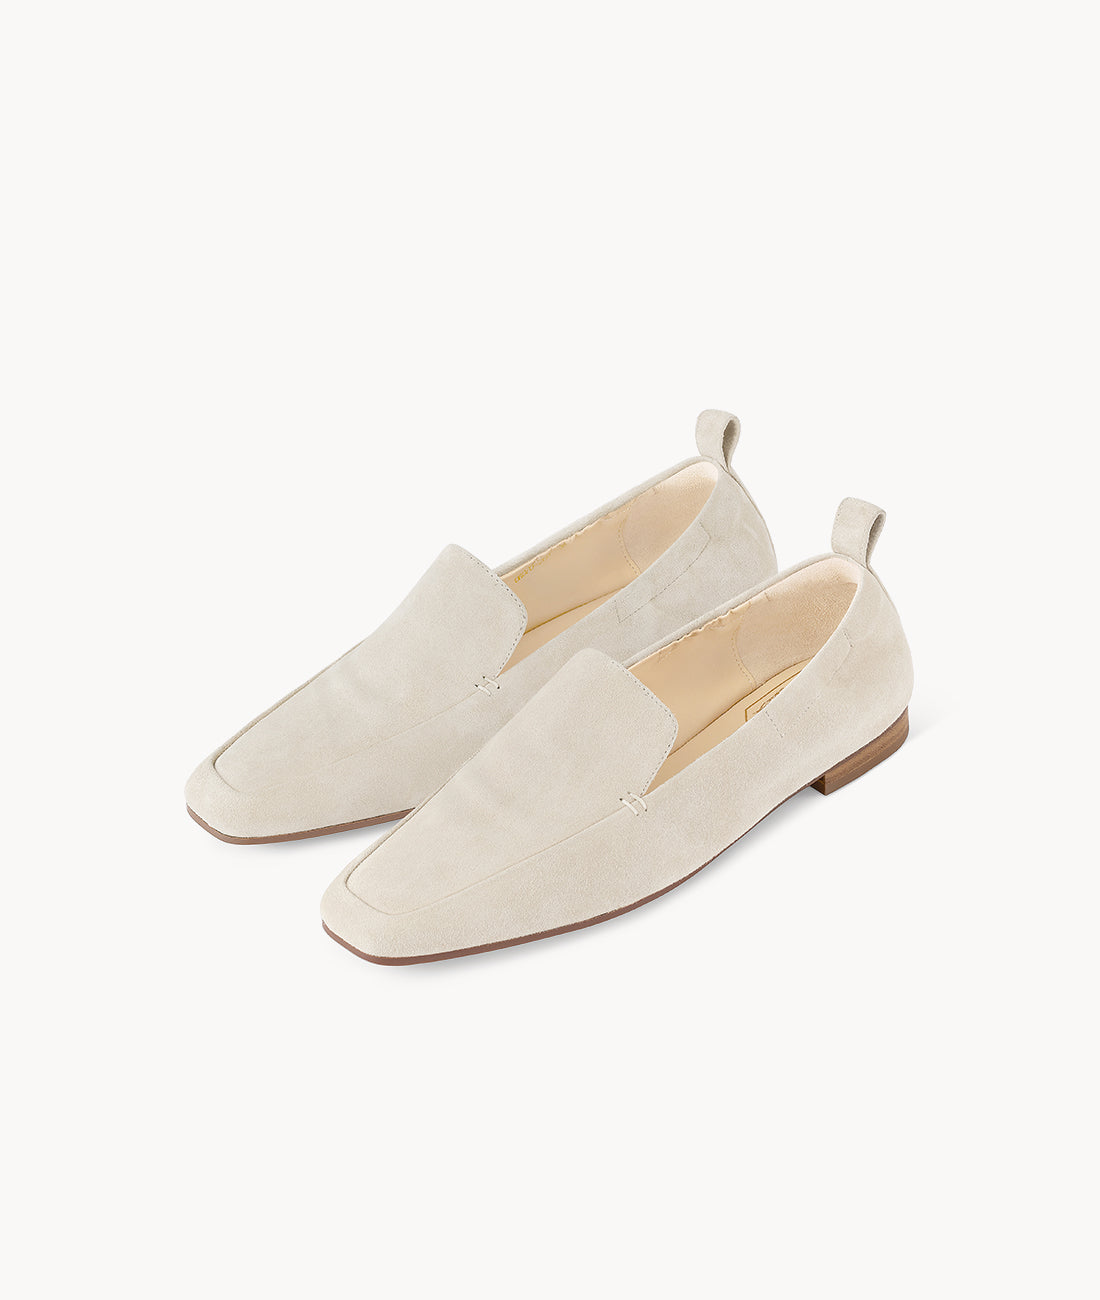 Almond Croissant Square-toe Creamy White suede Mattress Flat Loafers with 18mm heel